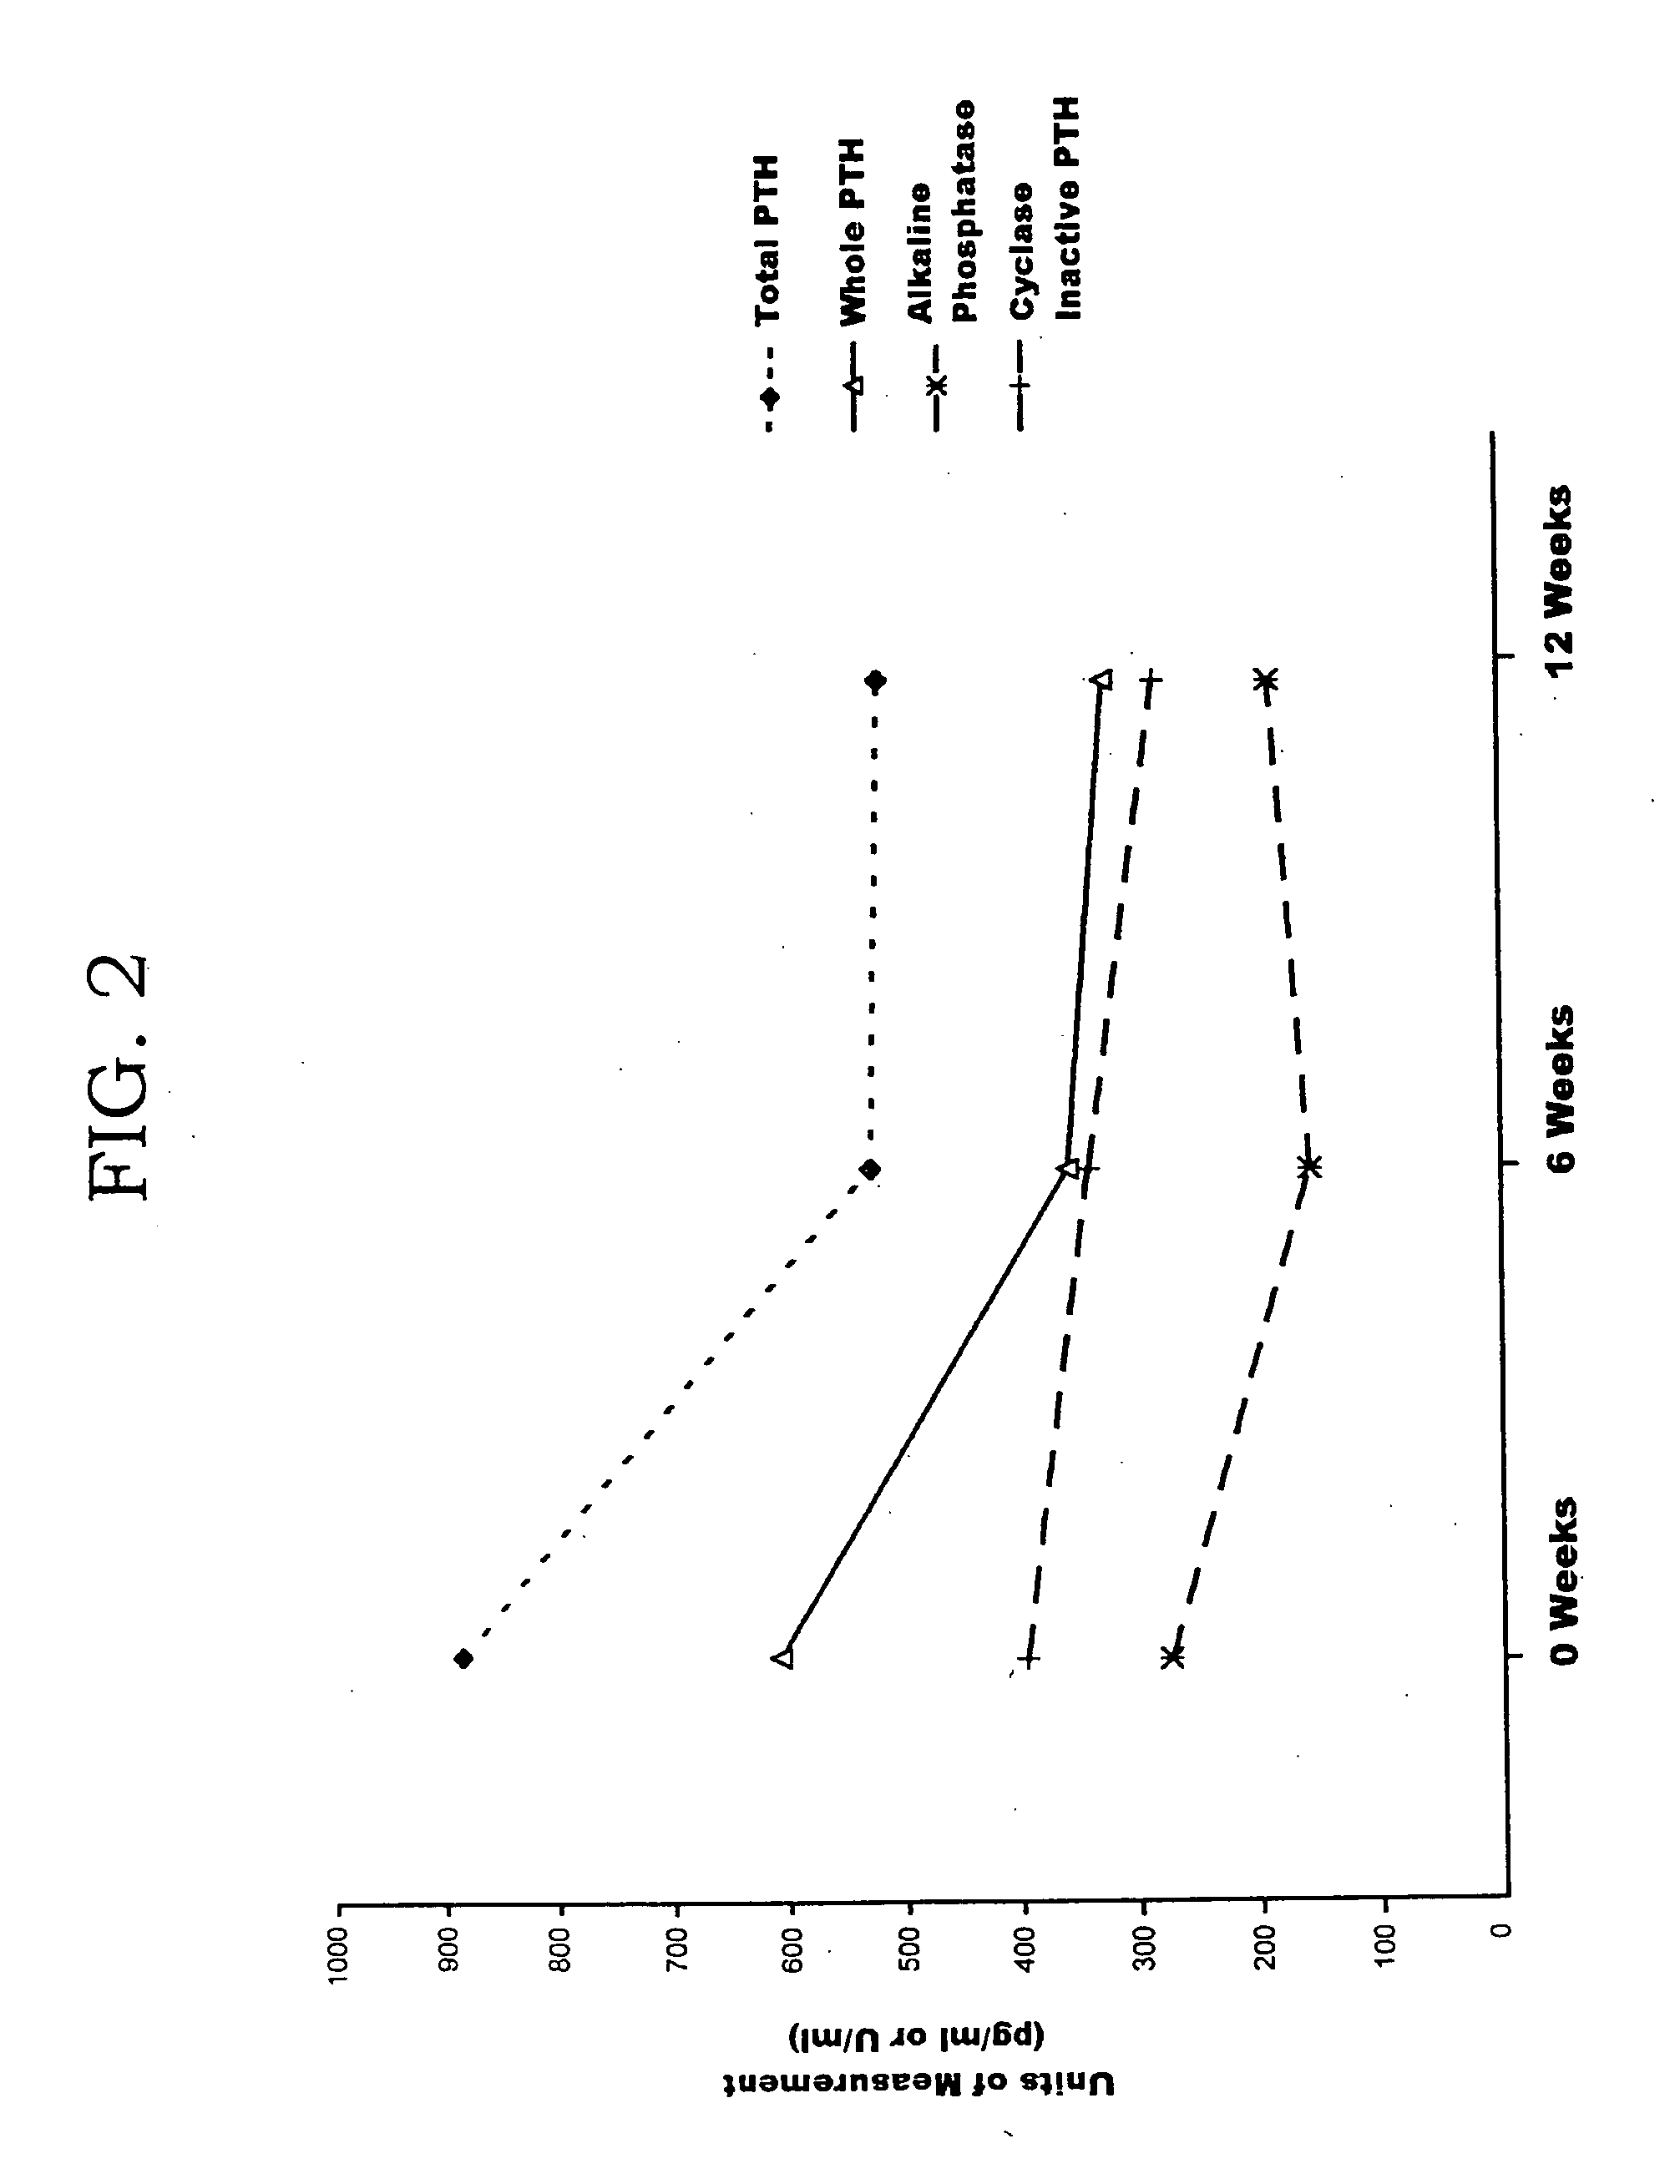 Methods for monitoring and guiding therapeutic suppression of parathyroid hormone in renal patients having secondary hyperparathyroidism